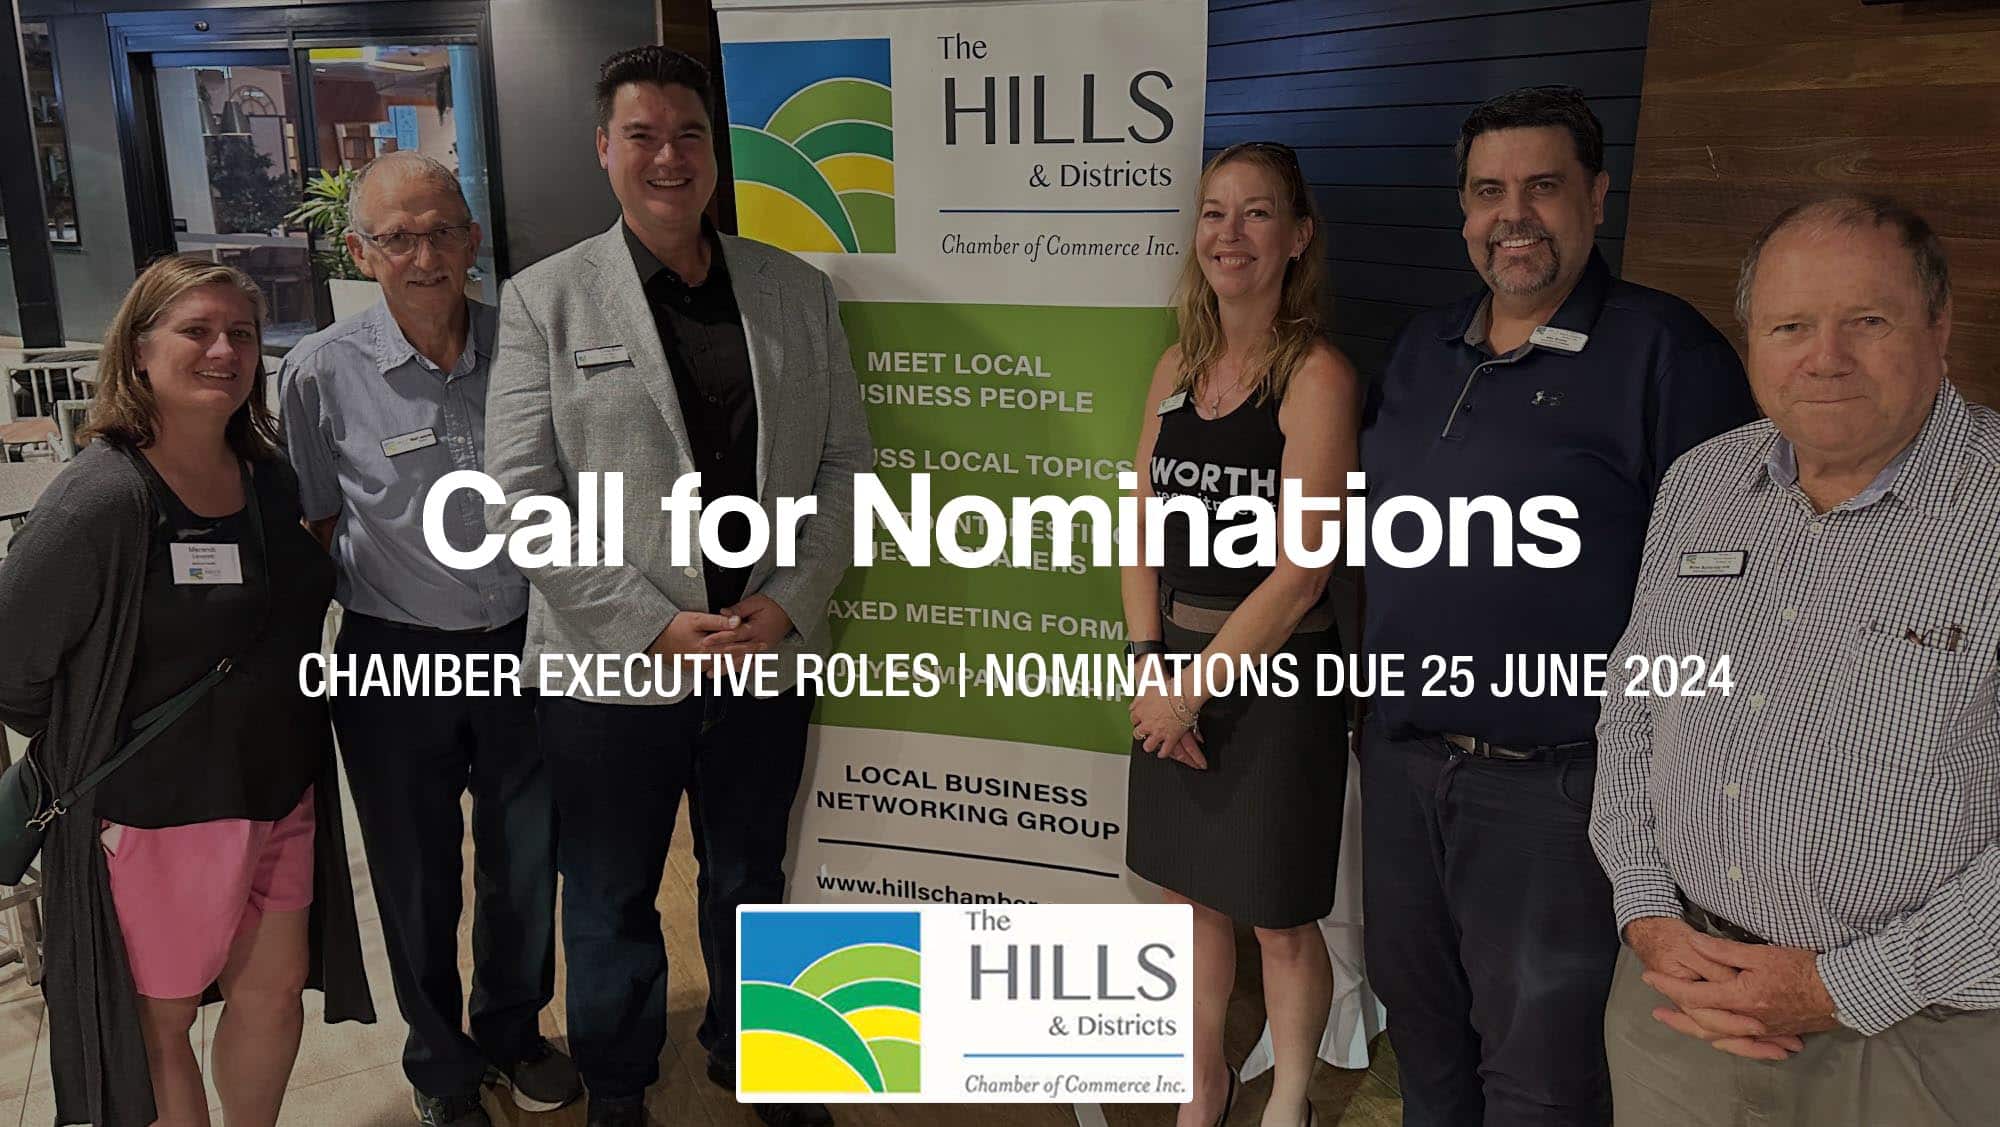 Call for Nominations for Chamber Executive Roles